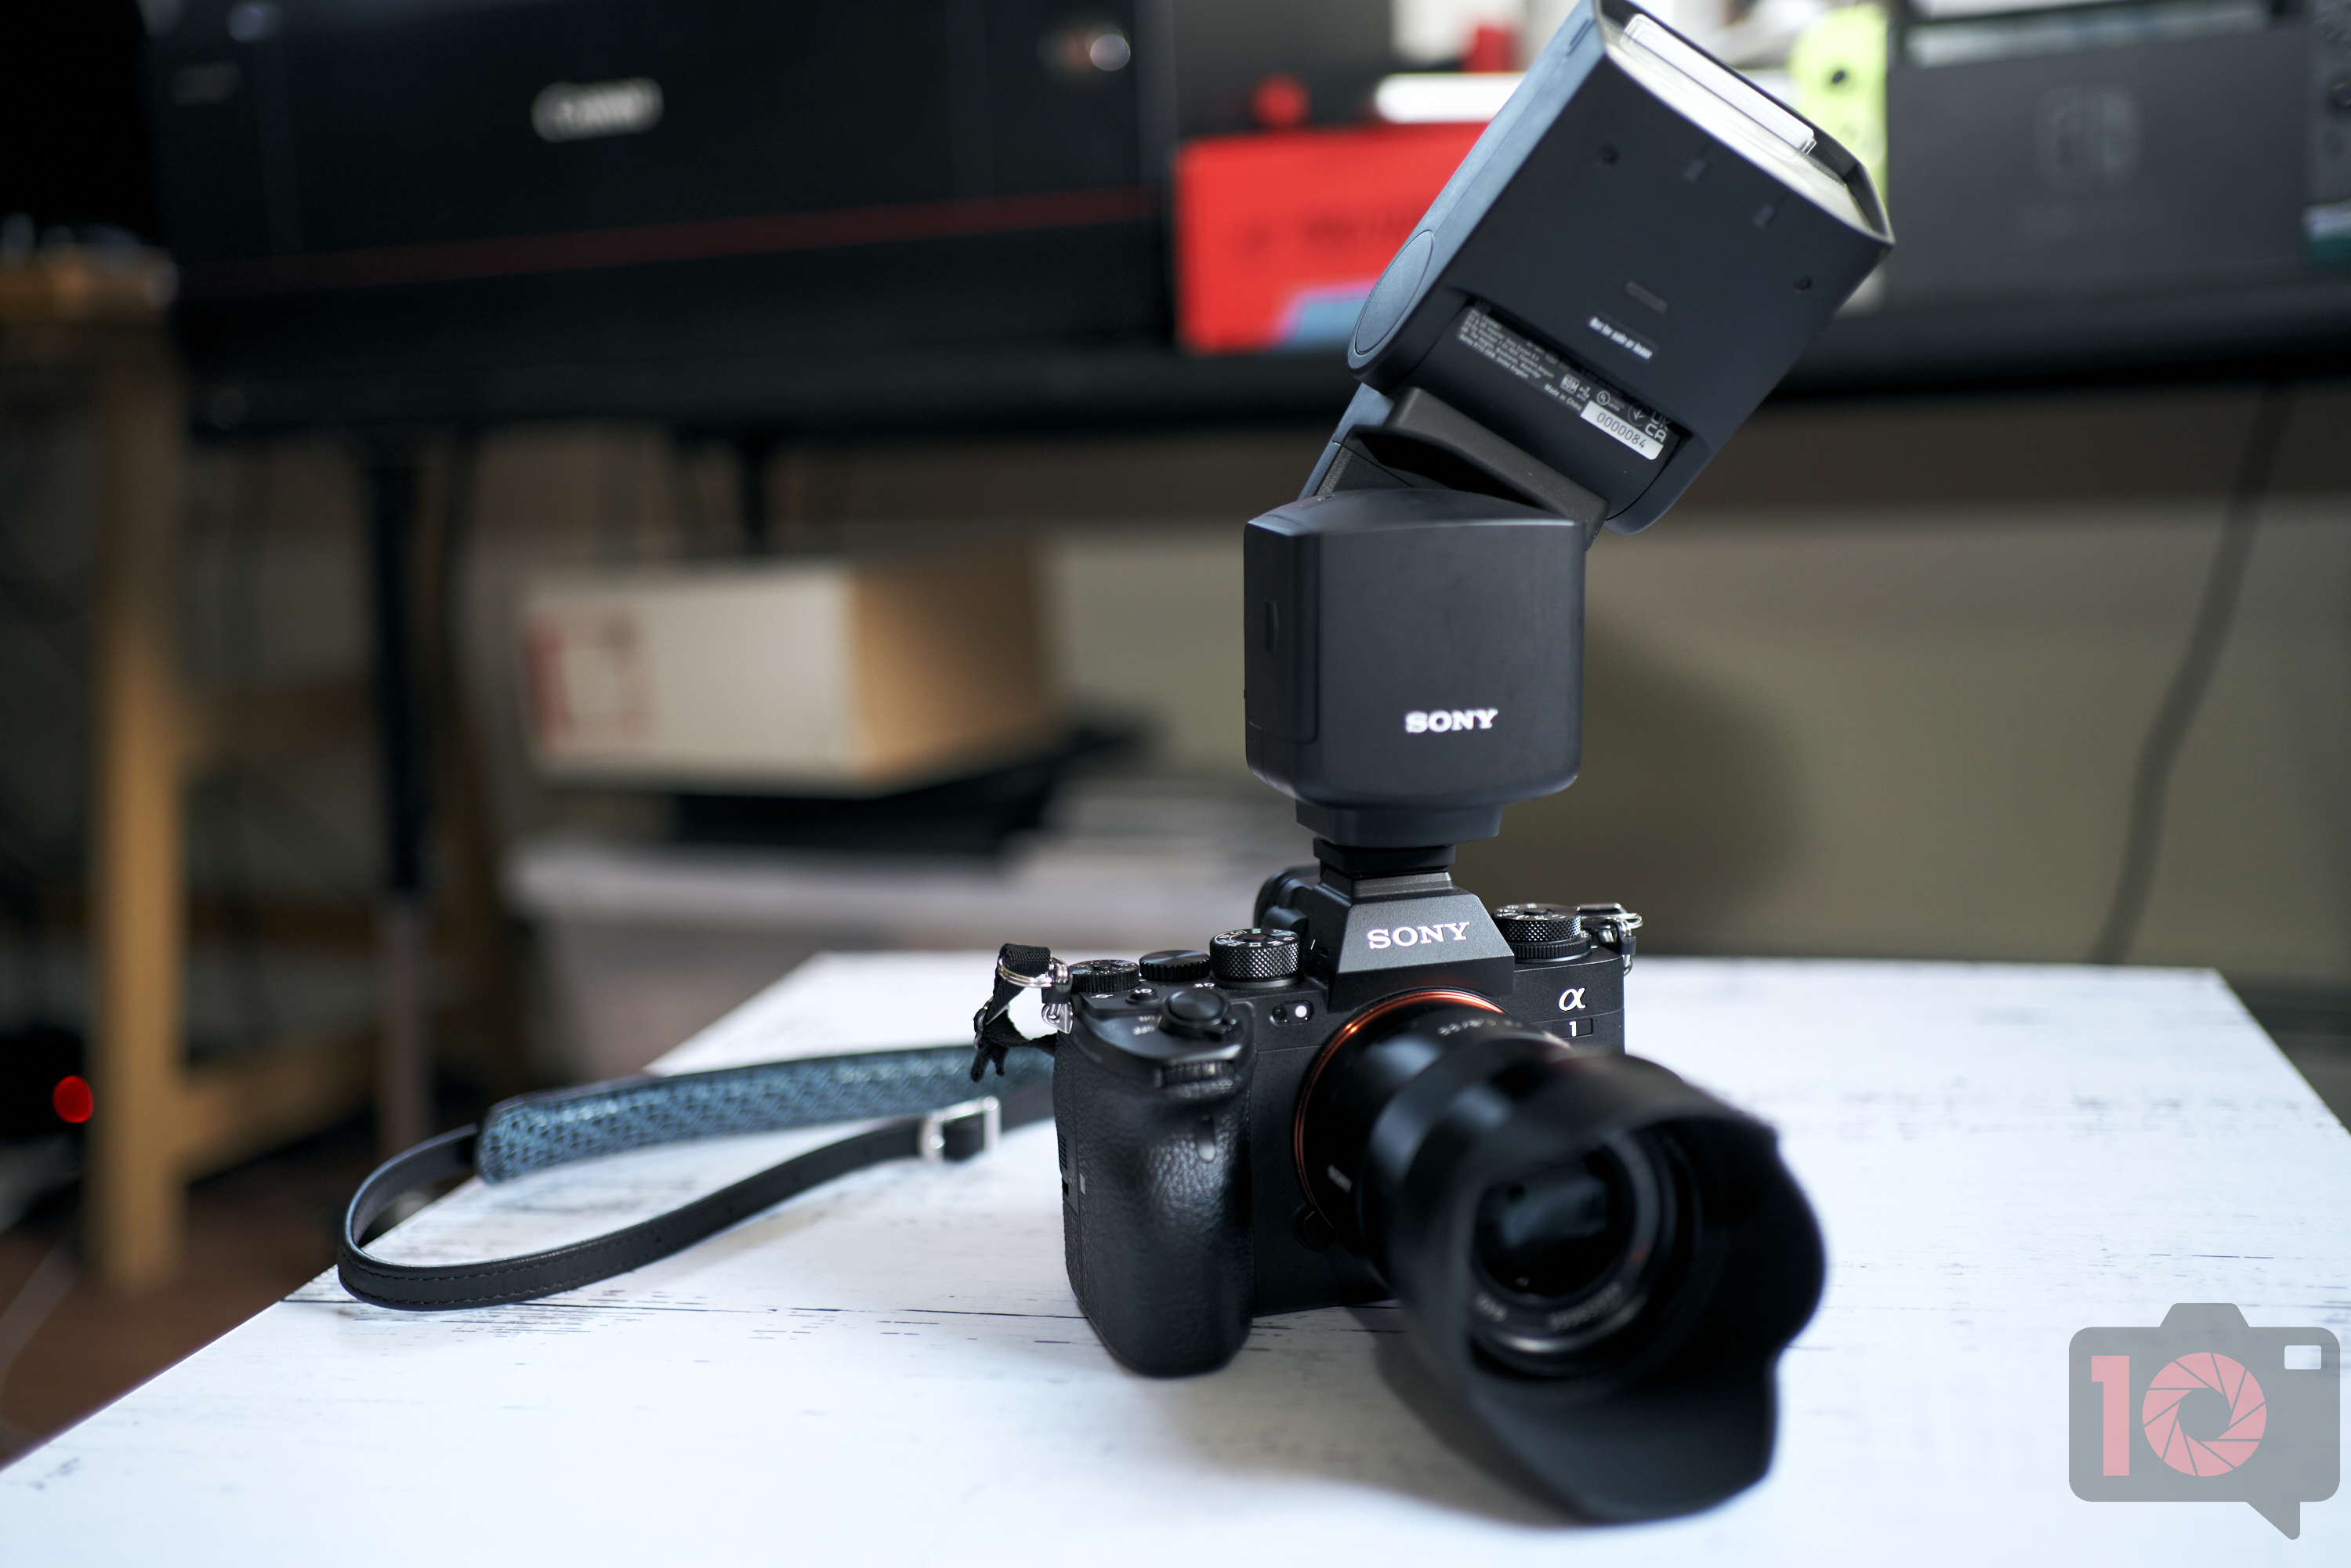 The Flash No One Needed: Sony HVL-F60R M2 Review